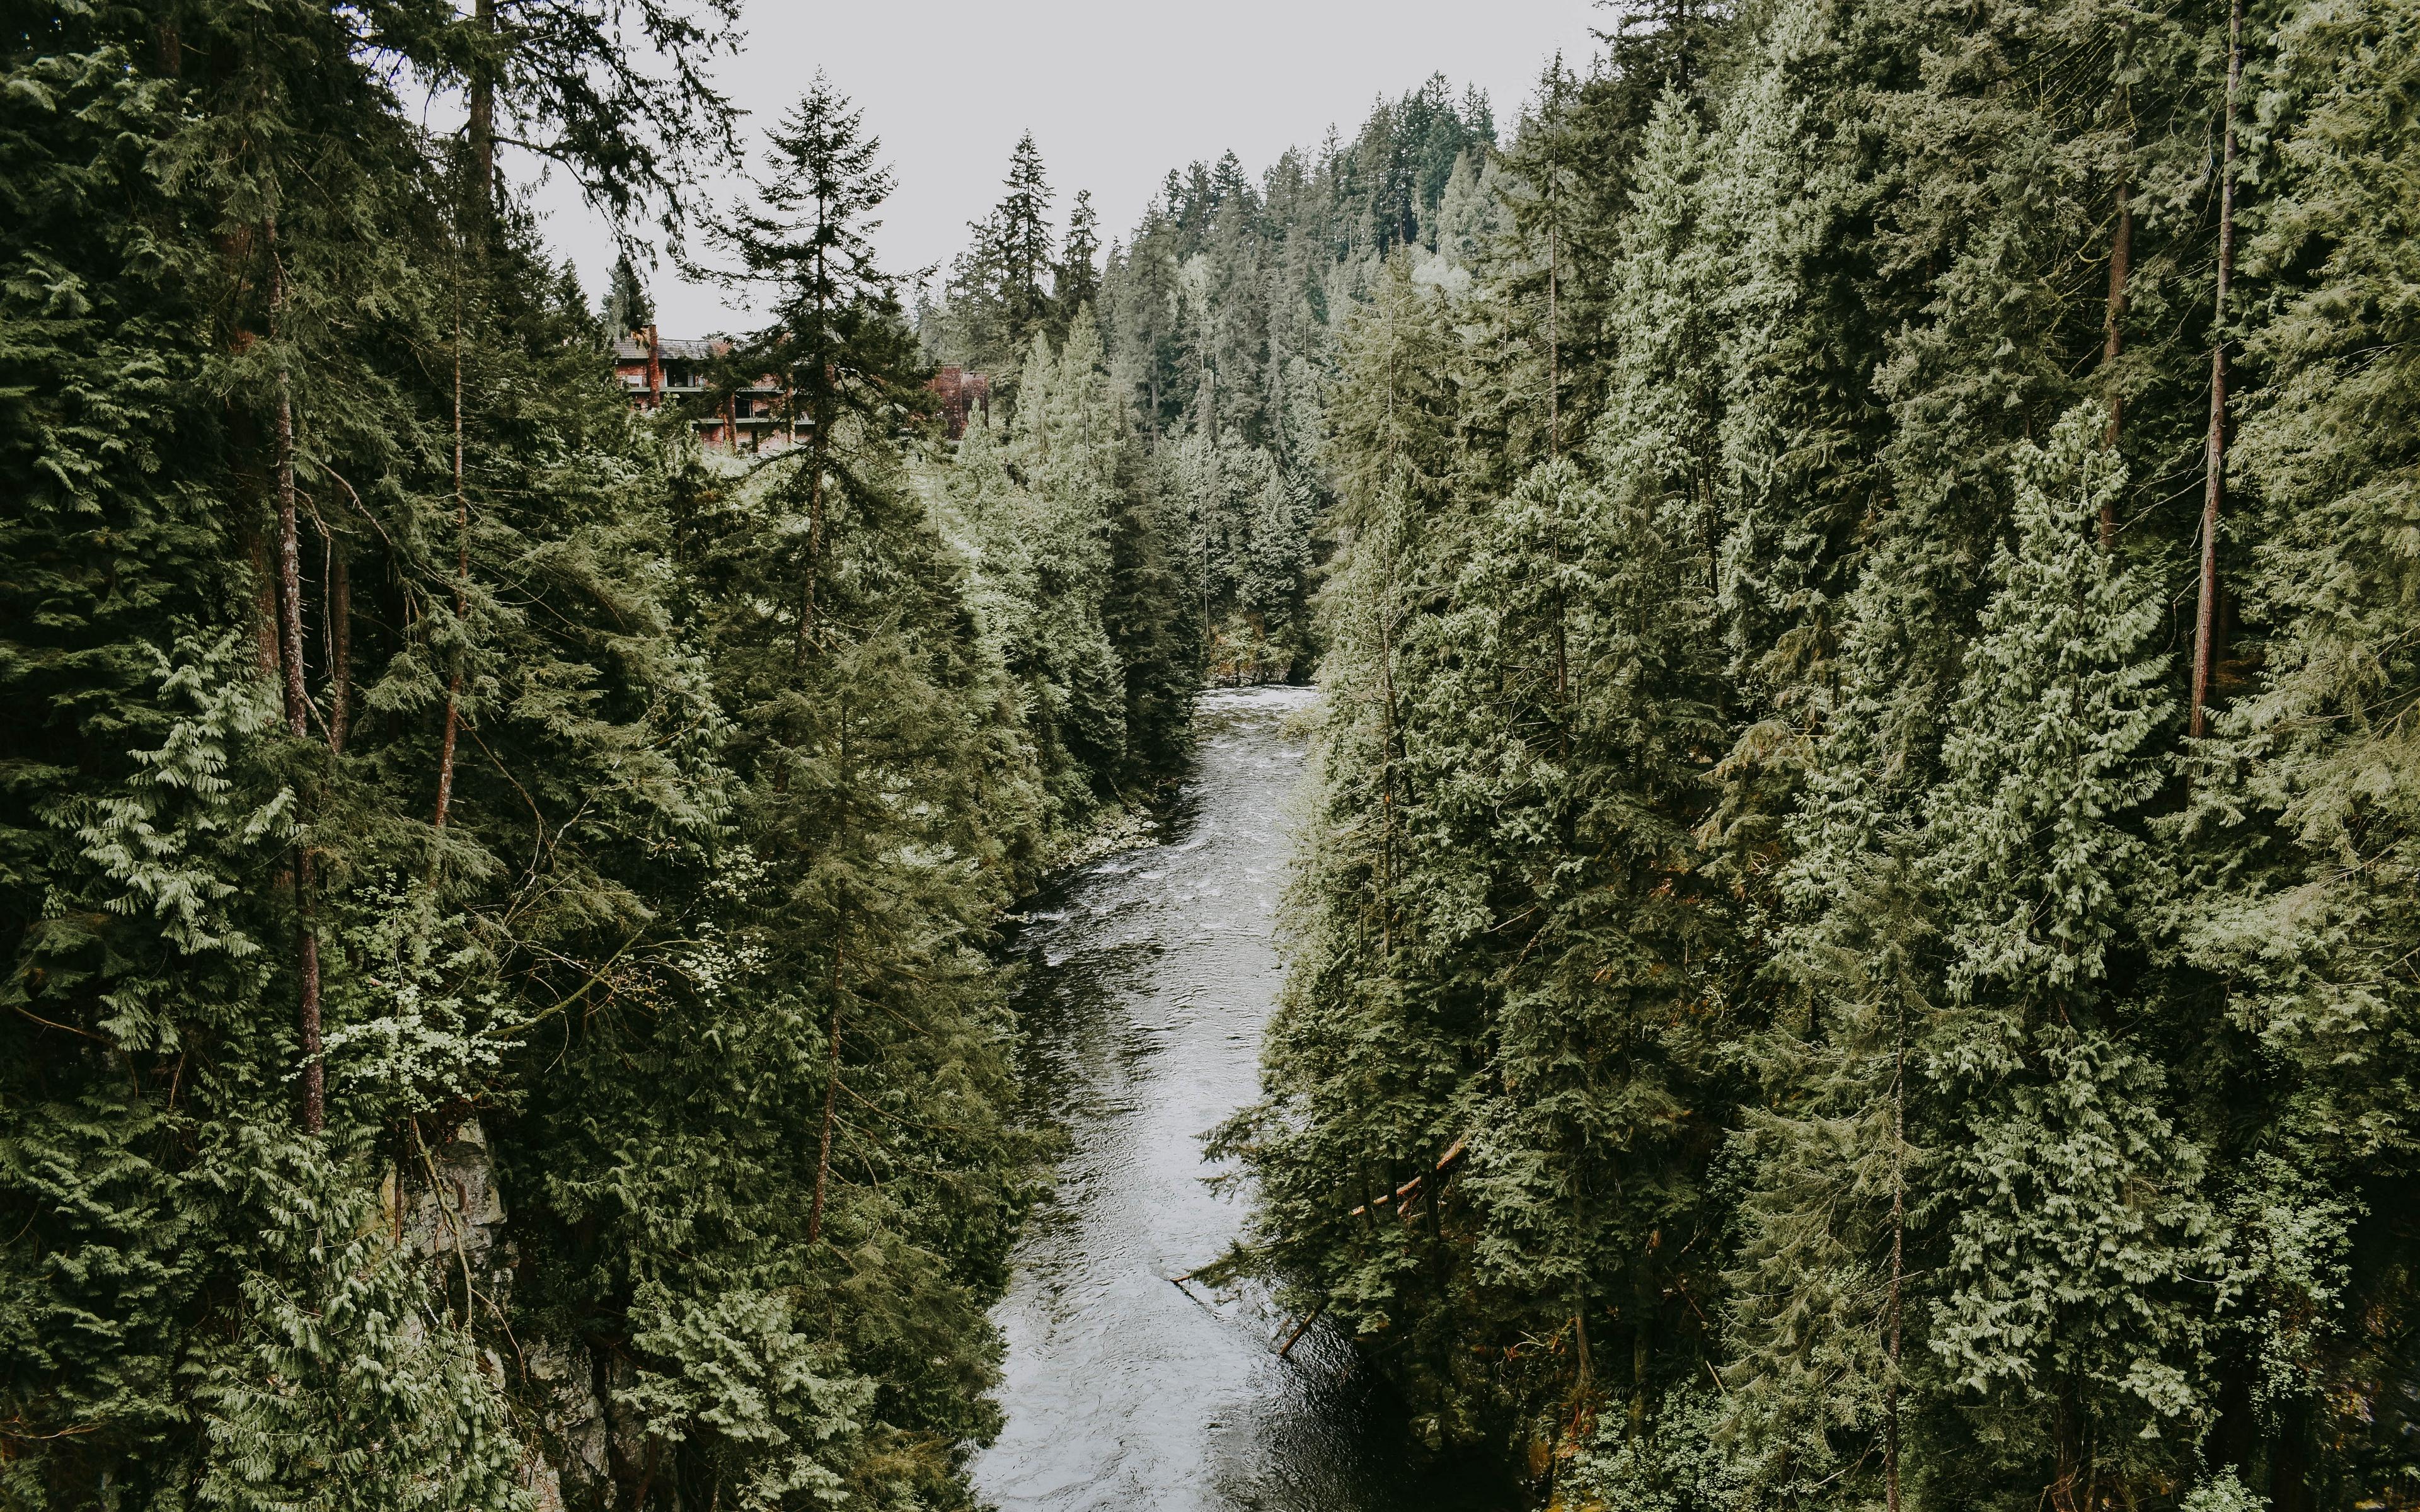 Download wallpapers 3840x2400 river, stream, trees 4k ultra